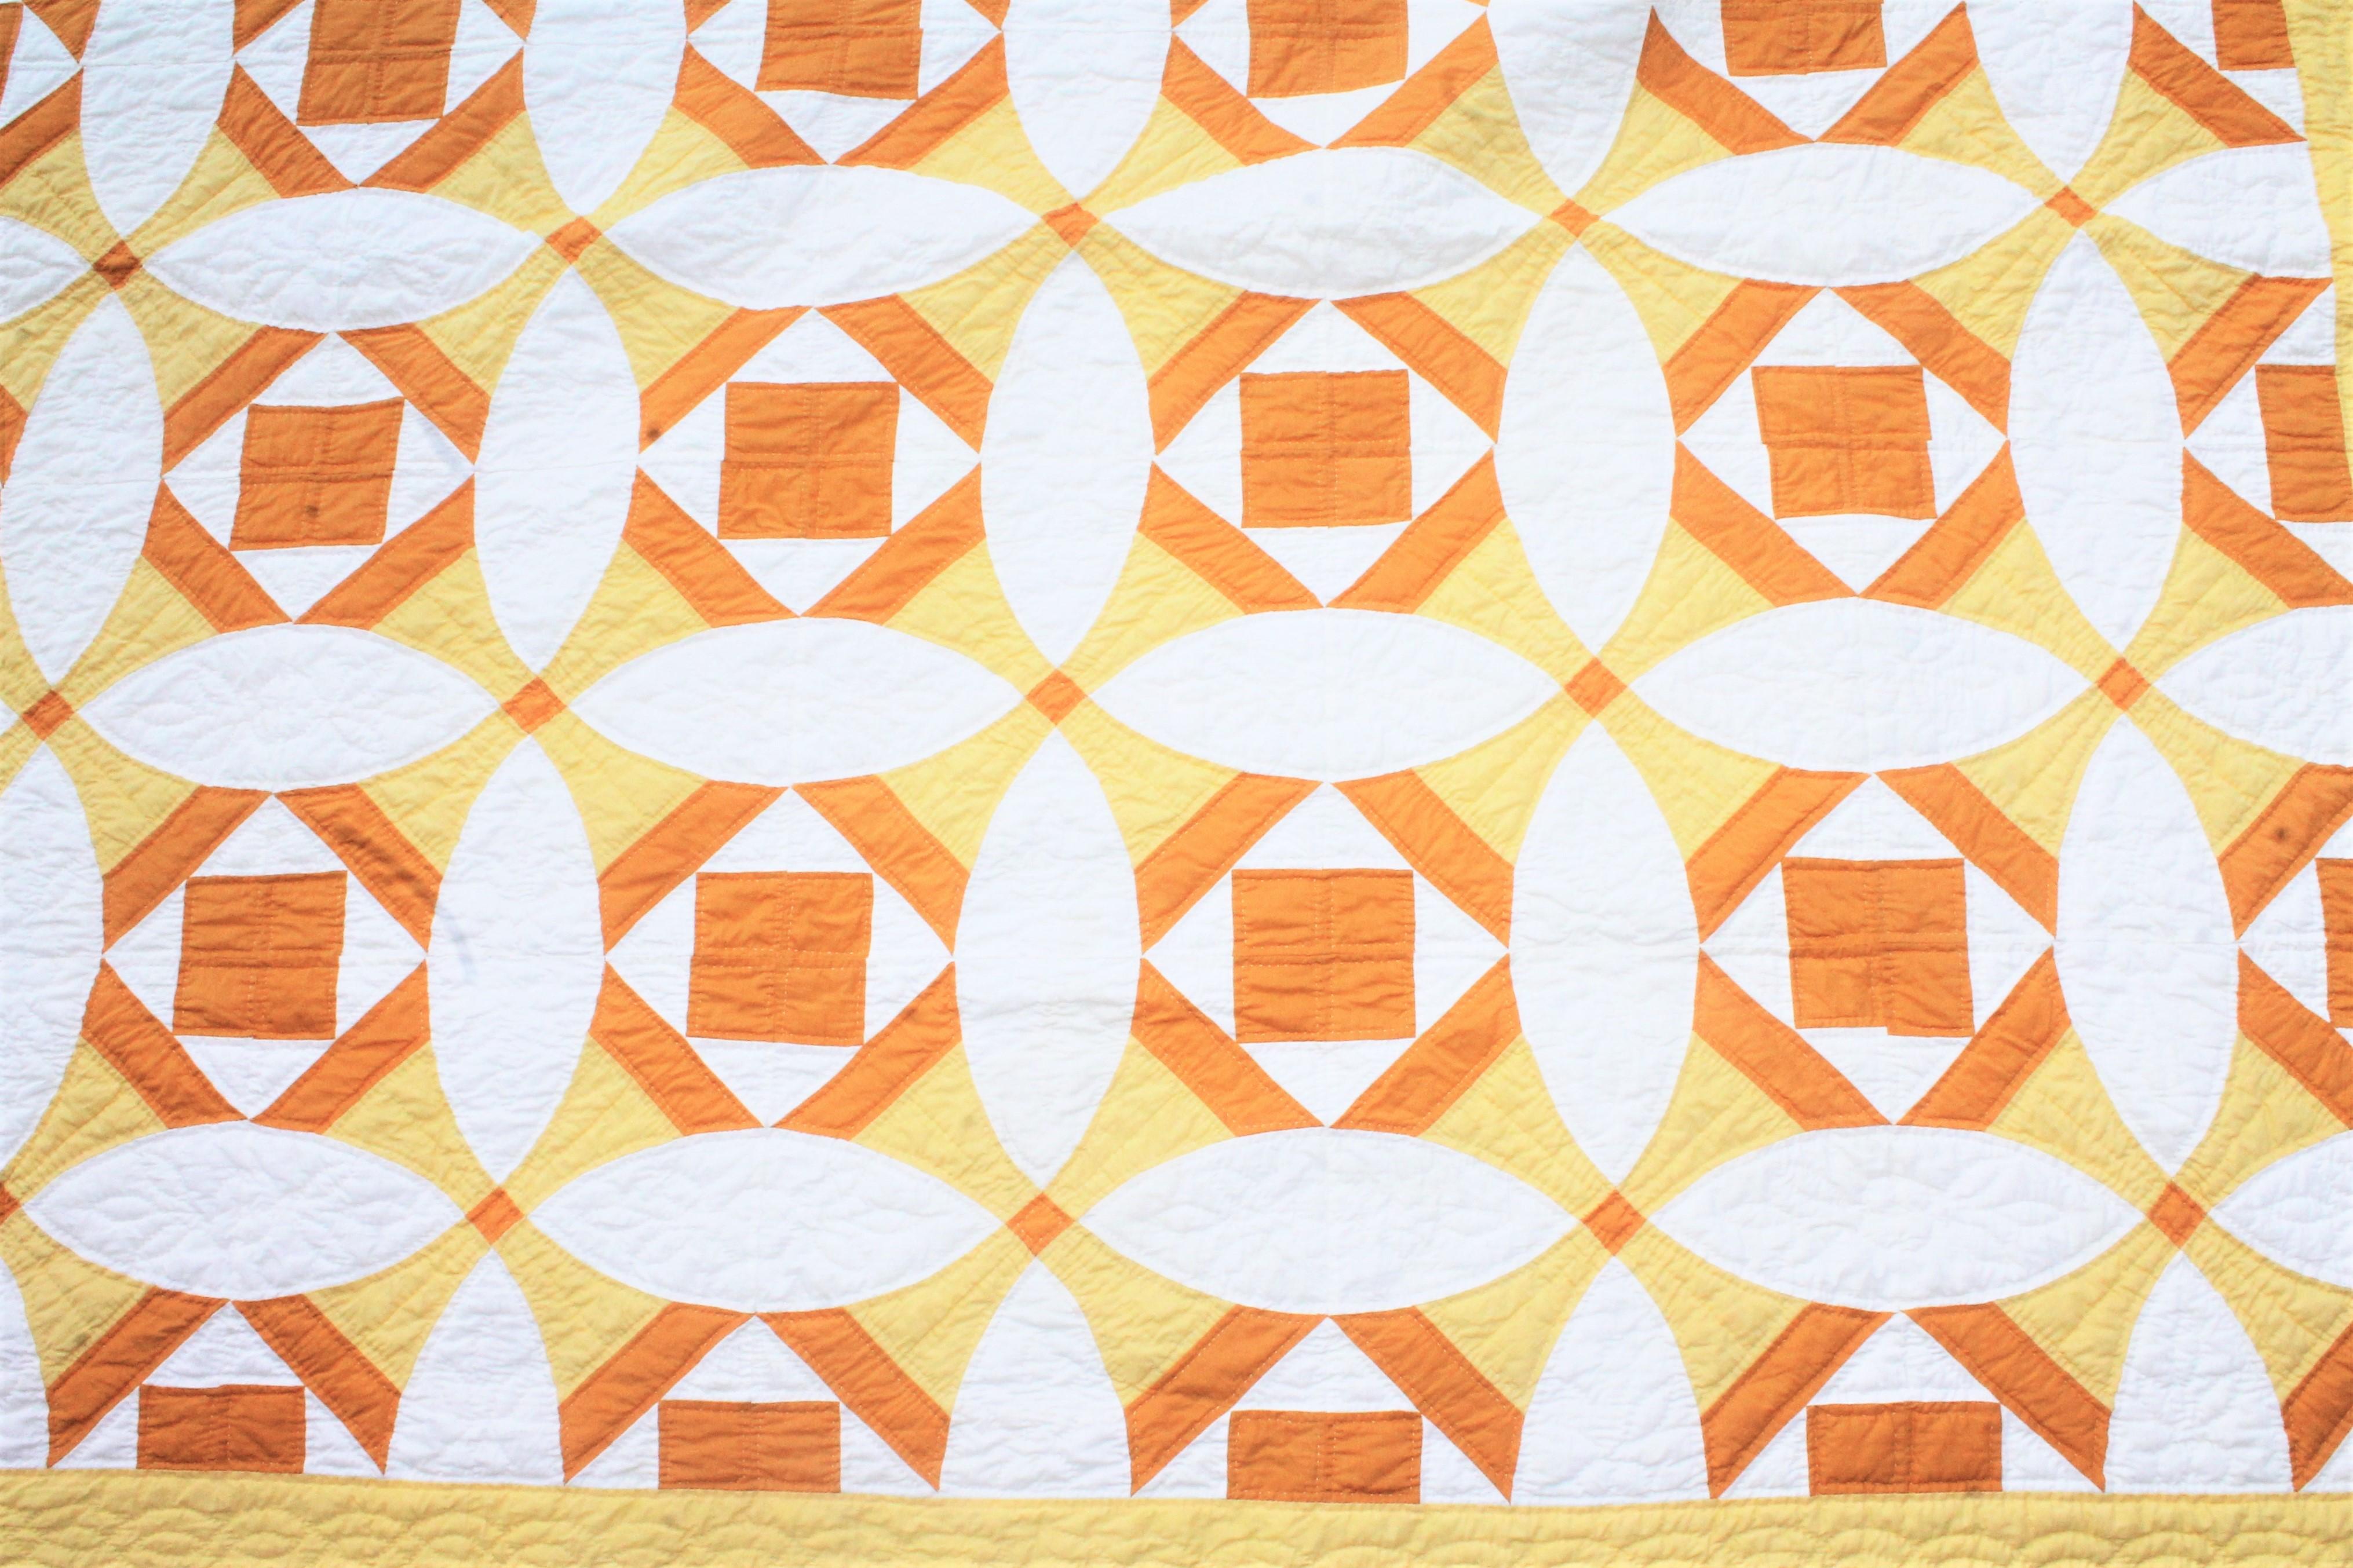 This finely pieced and quilted yellow and white quilt is in fine condition. There is also shades or rust in areas as well. Very nice quilting.